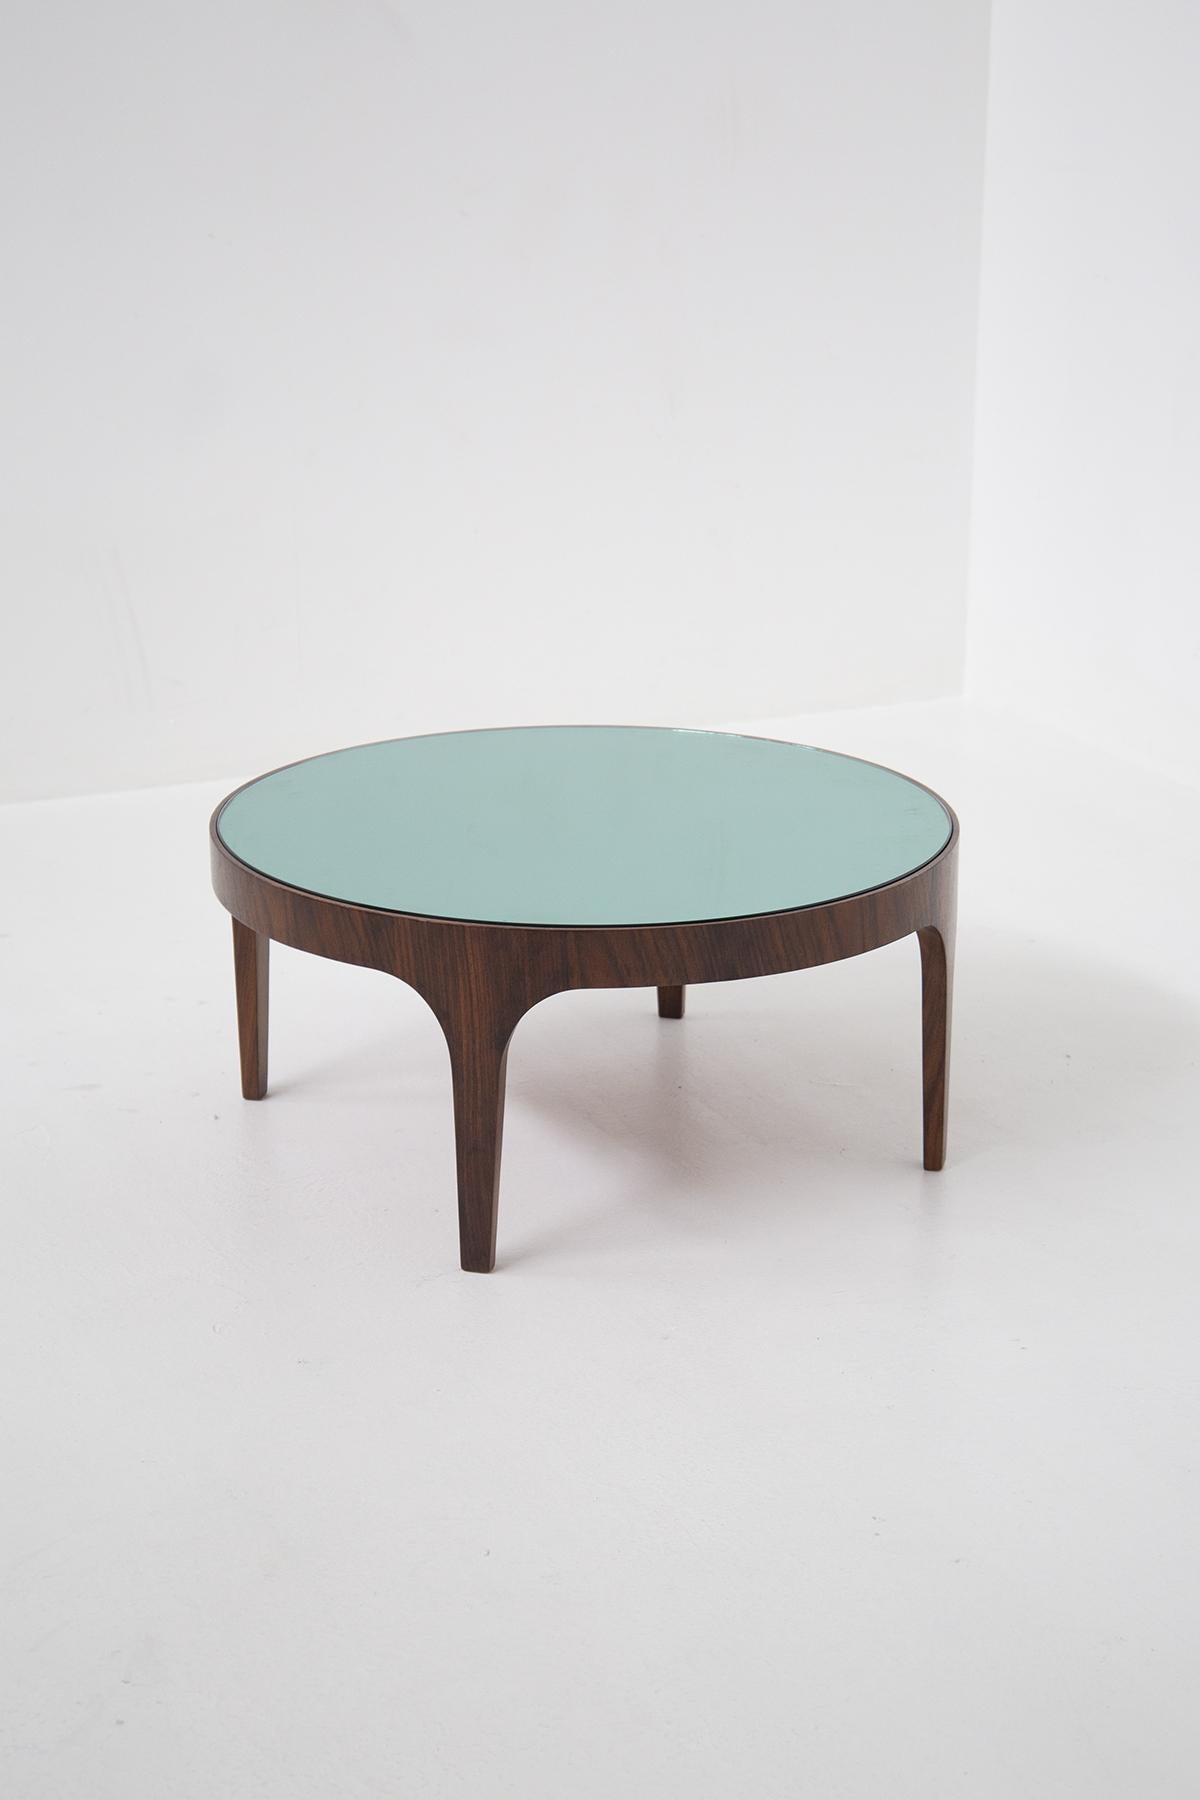 A rare and exceptionally pure round coffee table Model 1774 by Max Ingrand for Fontana Arte, manufacturer's label. In wood with a circular top in sky-blue mirrored glass, resting on an elegantly curved base raised on tapered legs. This table by